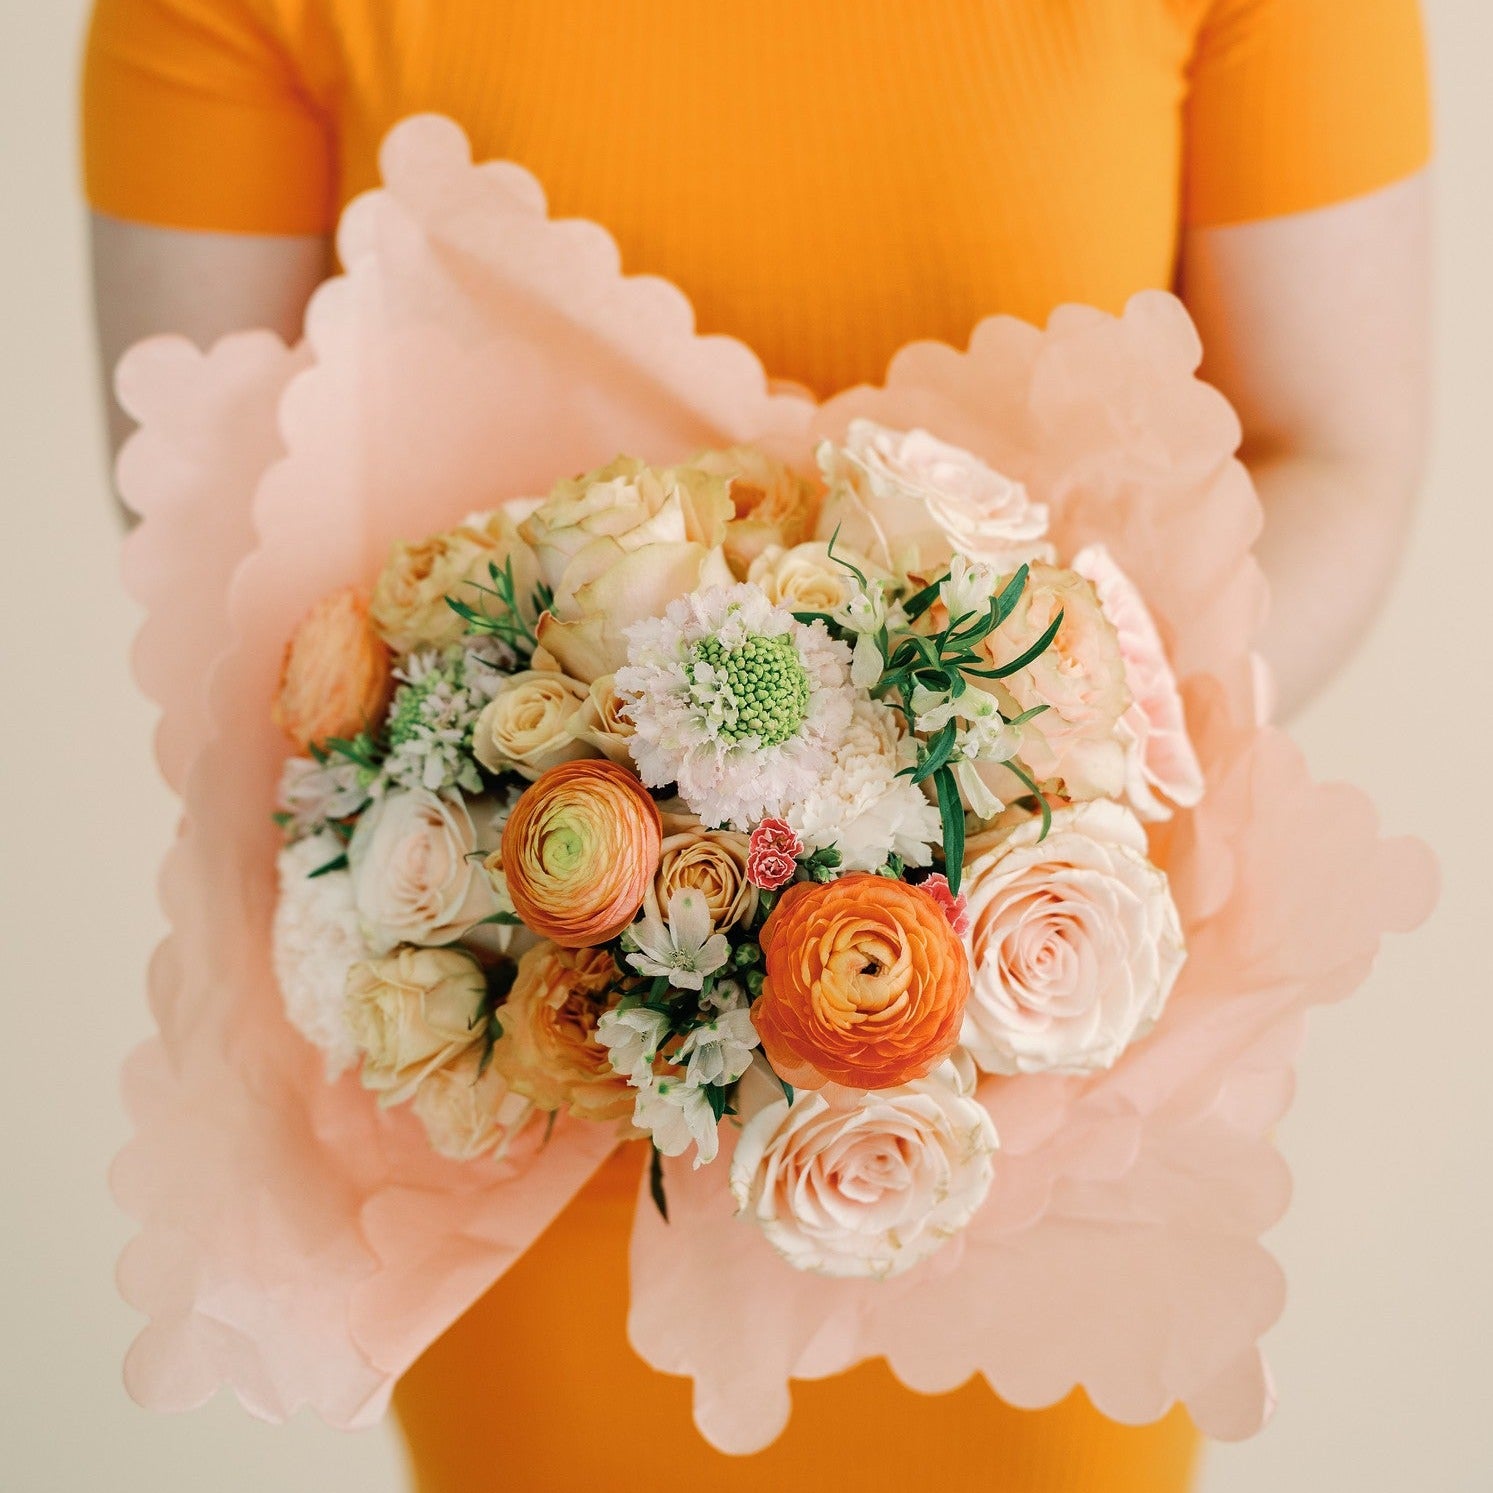 Peachy Keen Bouquets